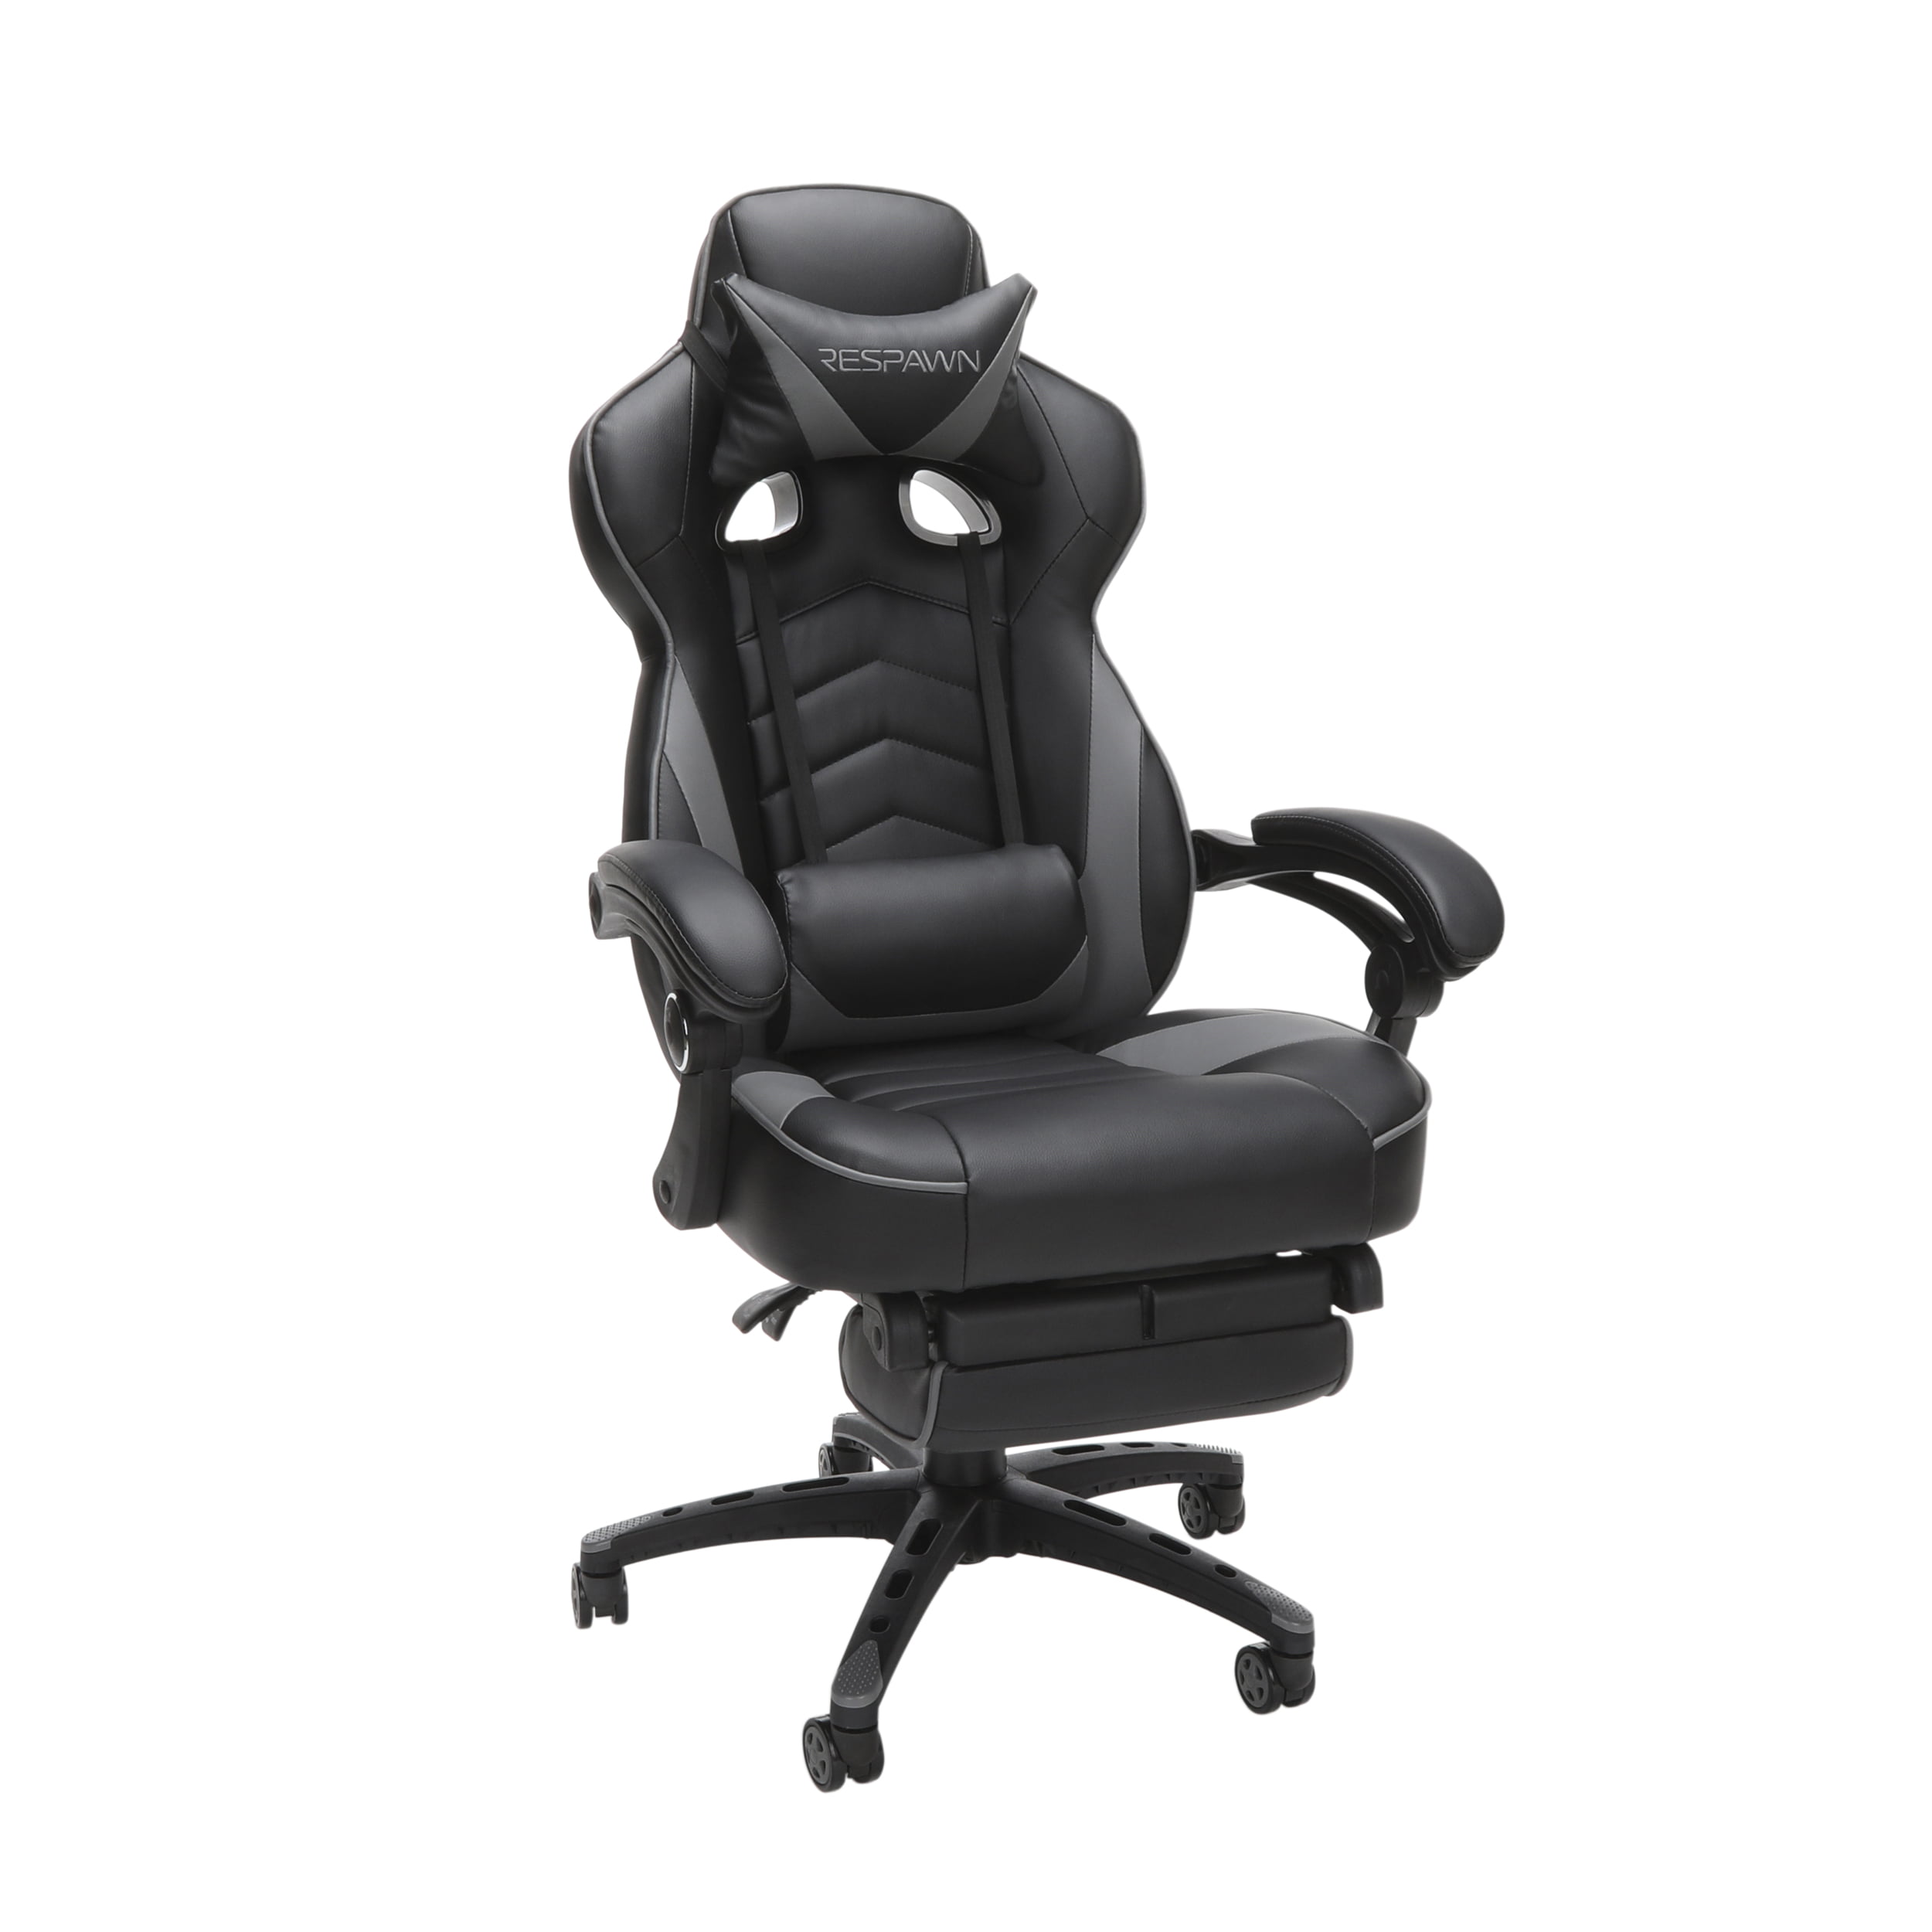 RESPAWN 110 Racing Style Gaming Chair, Reclining Ergonomic Chair with